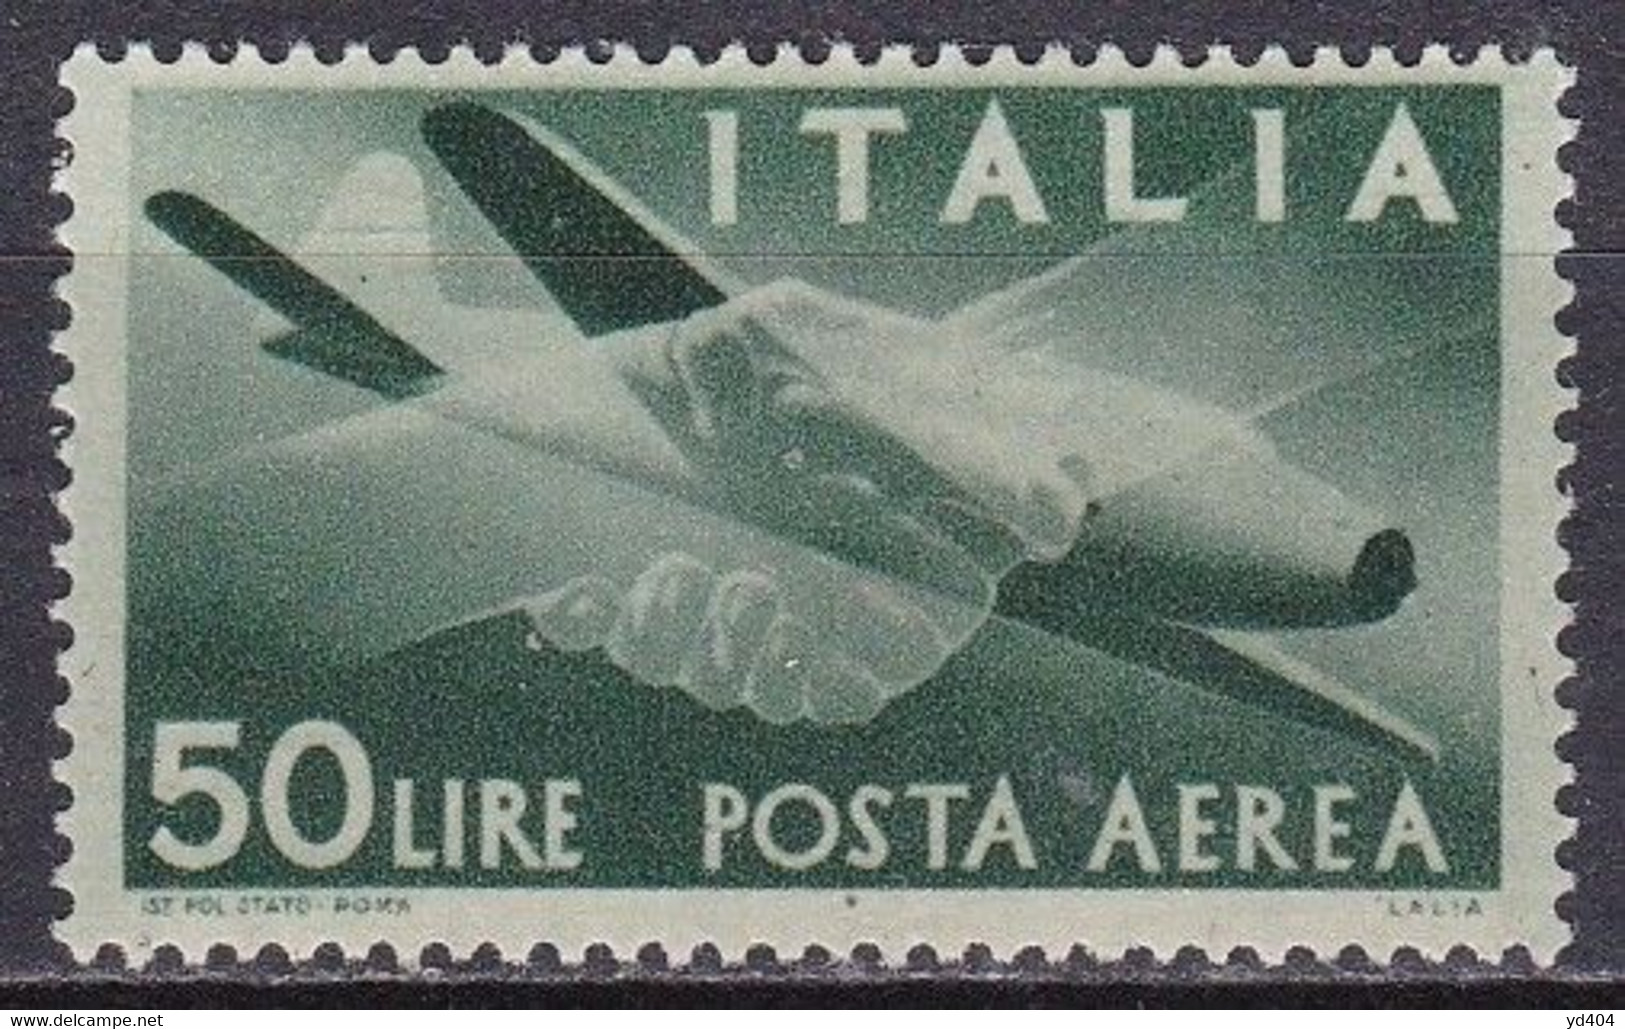 IT125 – ITALY - ITALIE – AIRMAIL – 1947 – CLAPS HANDS & PLANE – SG # 677 MVLH 50 € - Airmail